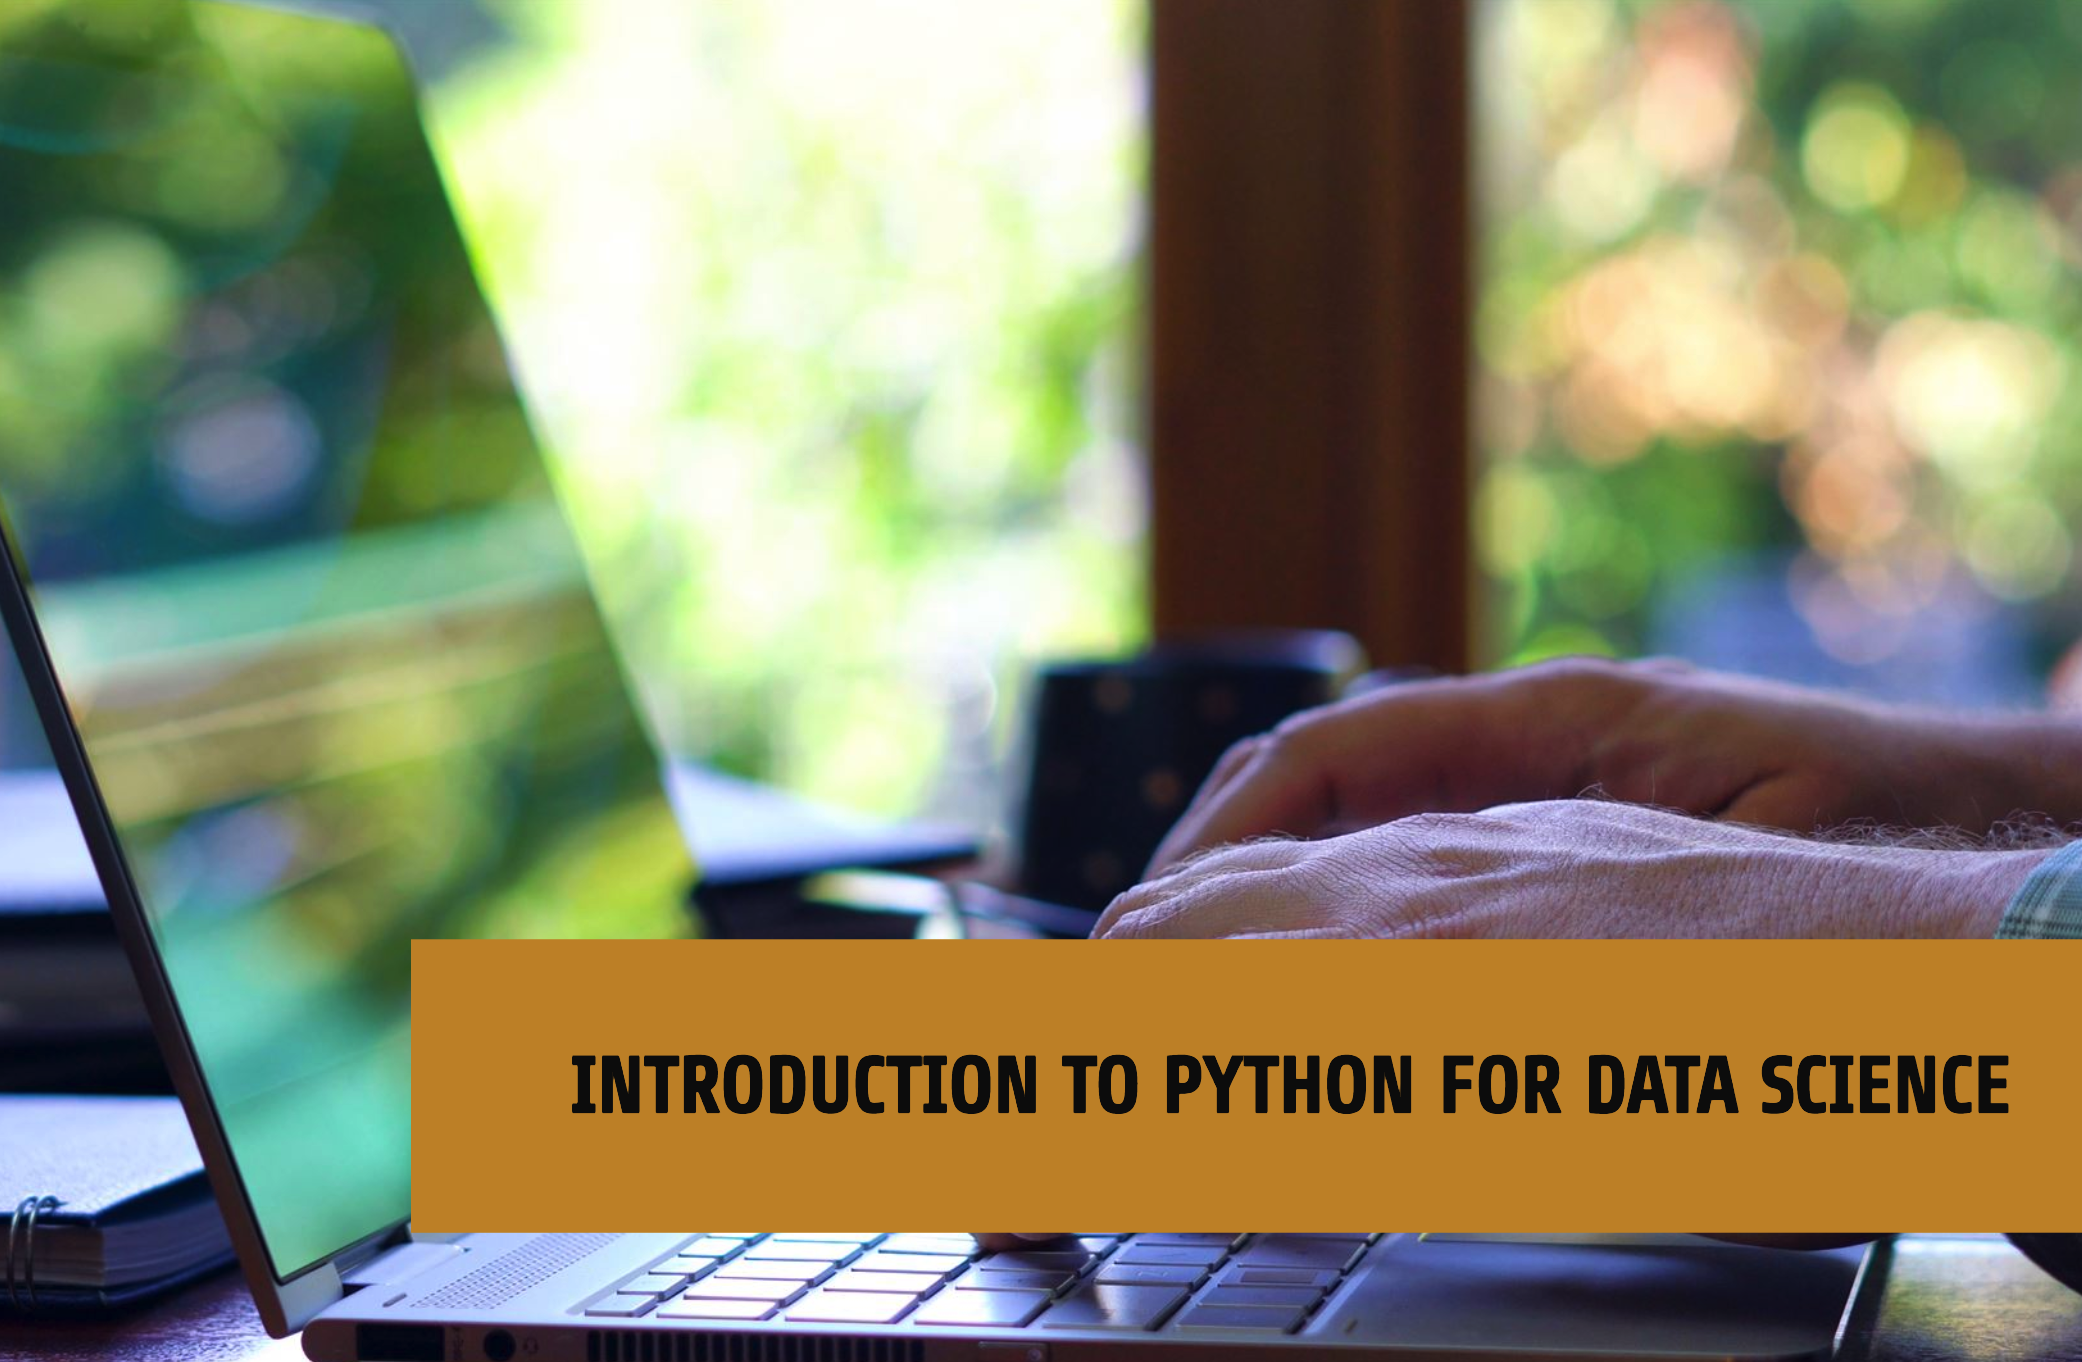 Introduction to Python for Data Science: Why Python?